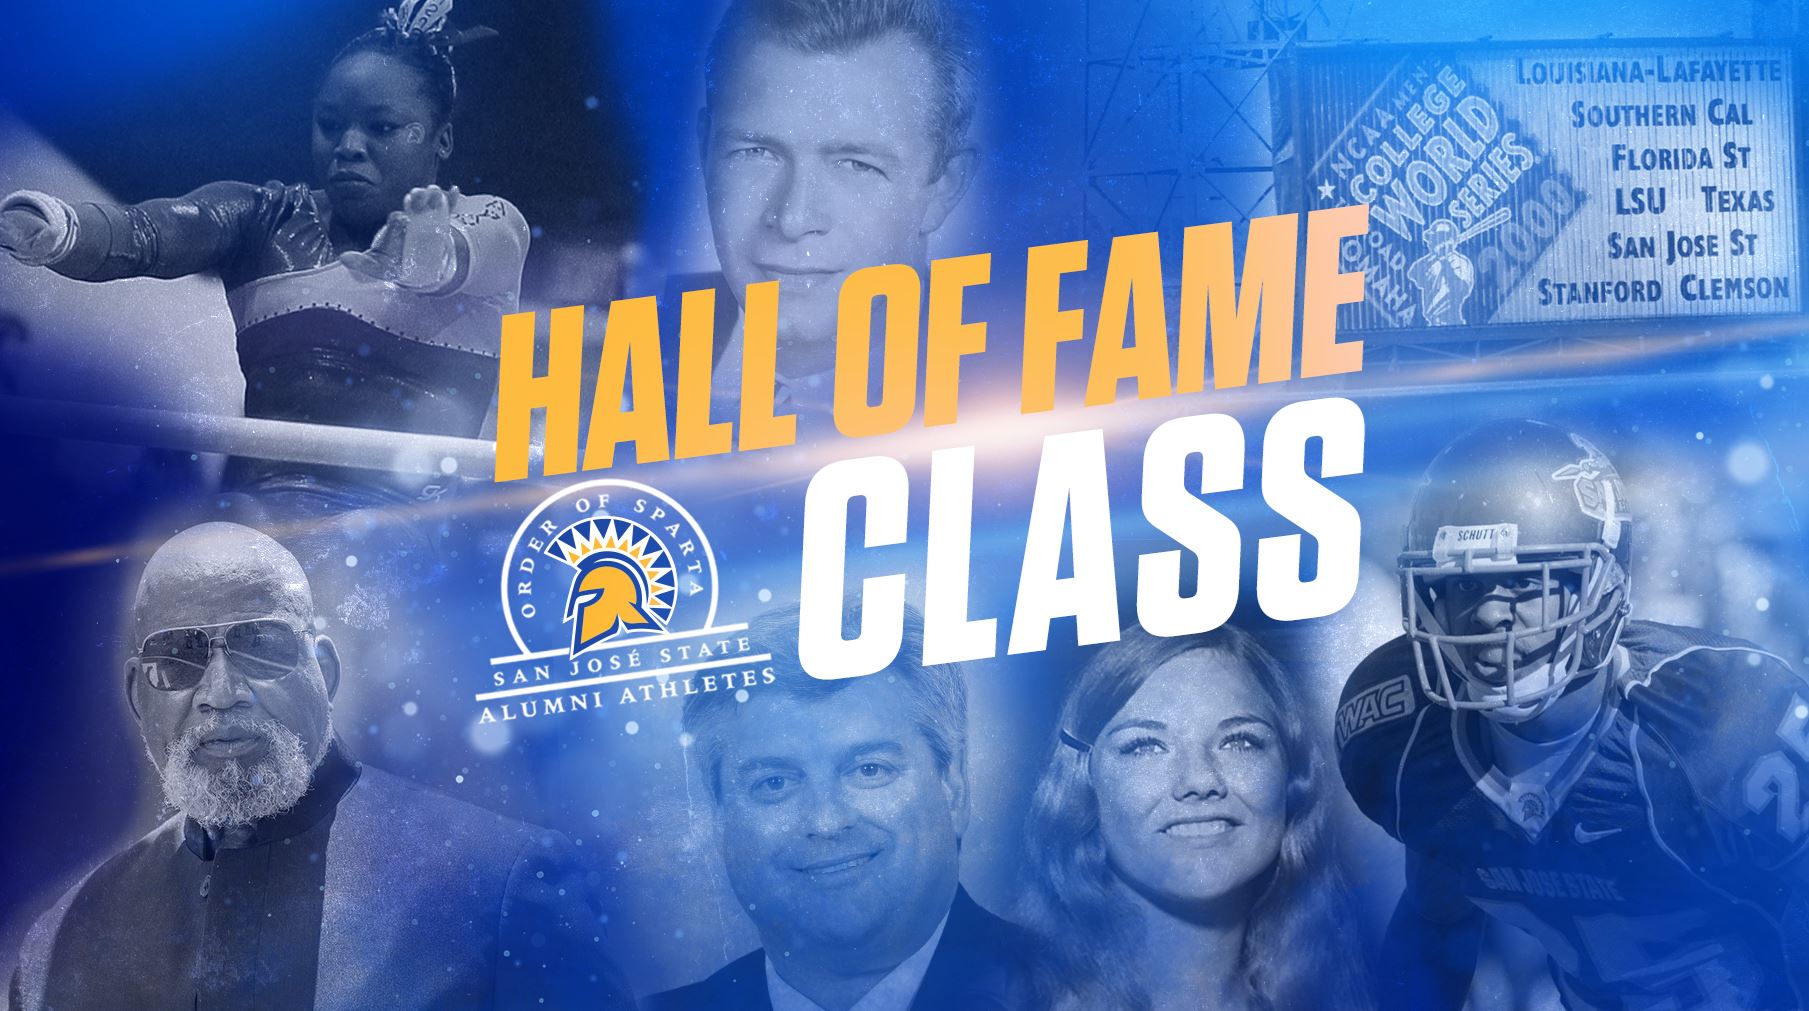 Sports Authority Executive Director, John Poch selected to San Jose State’s Hall of Fame Class of 2020